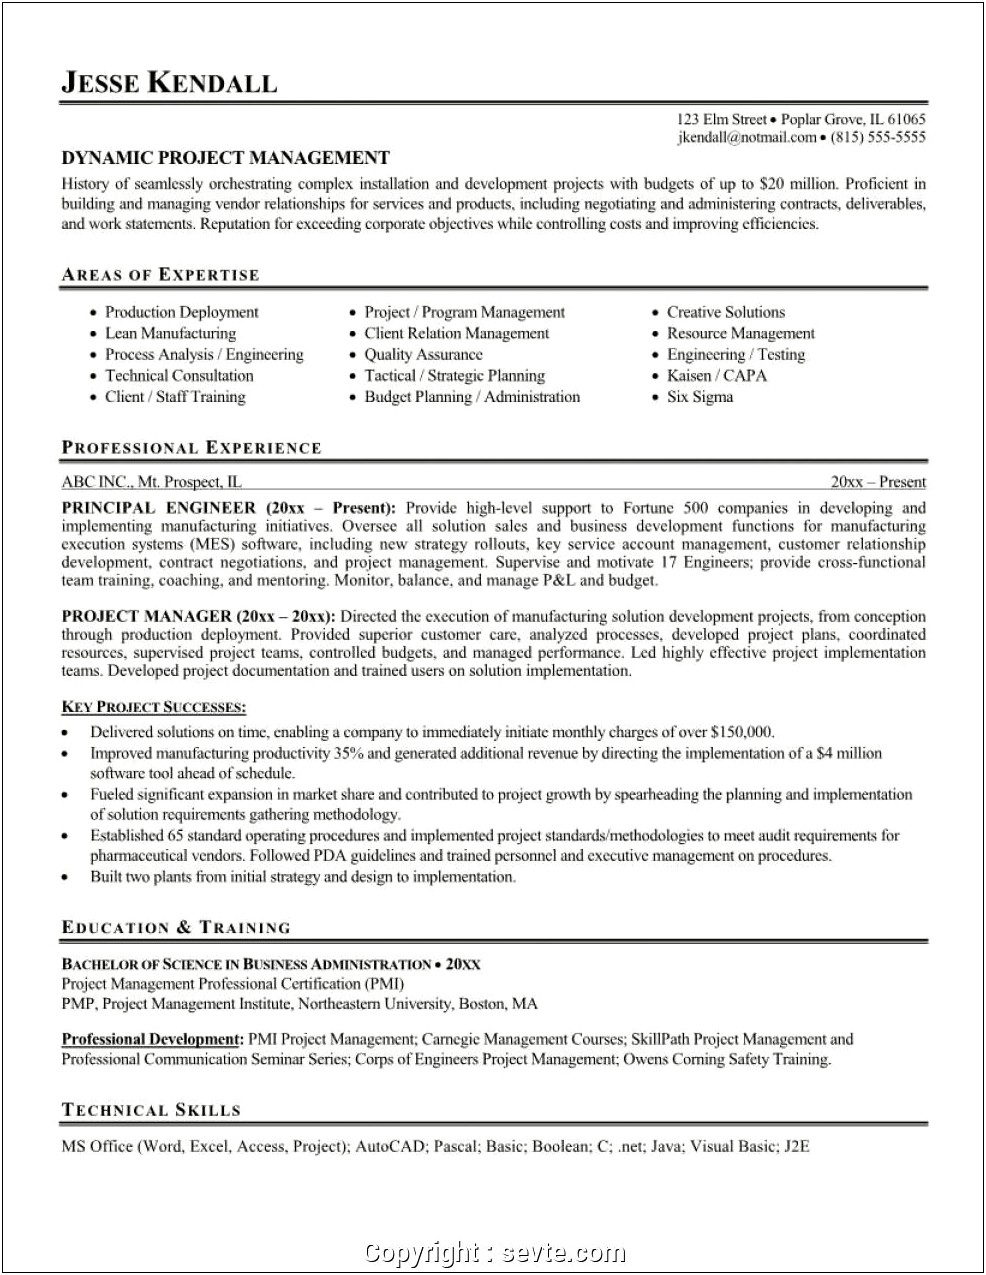 It Infrastructure Manager Resume Pdf